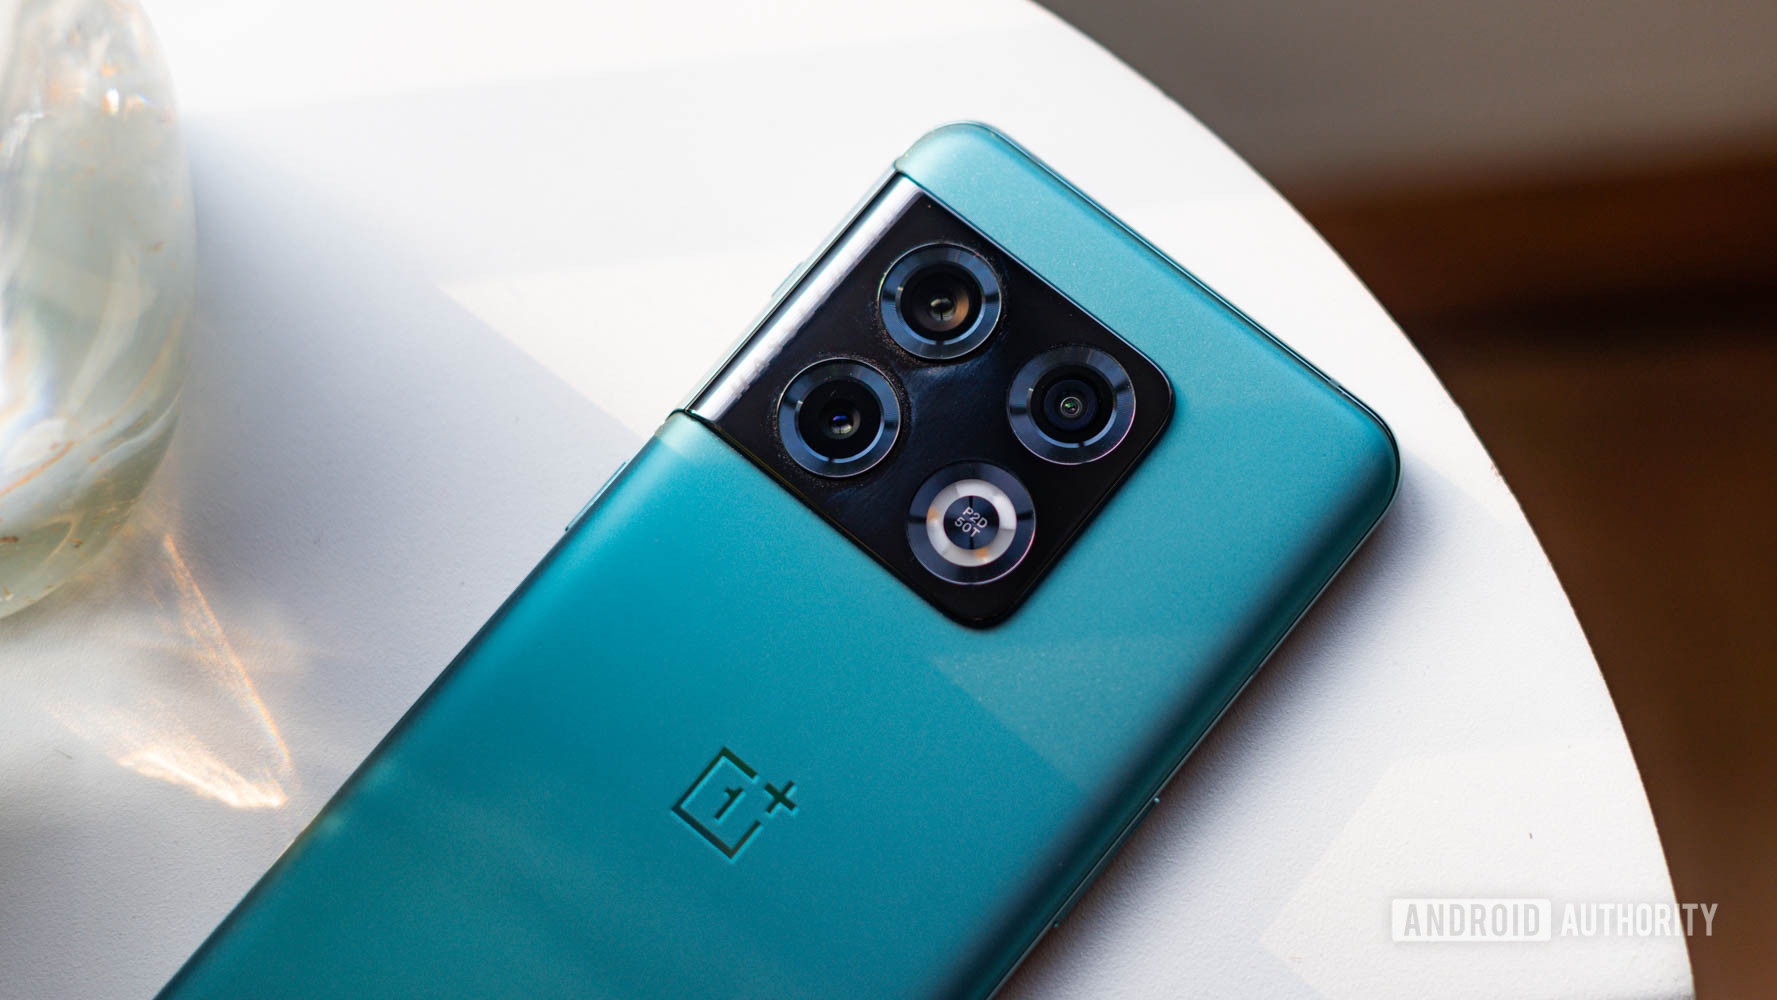 The OnePlus 10 Pro review refocused the camera from top to bottom